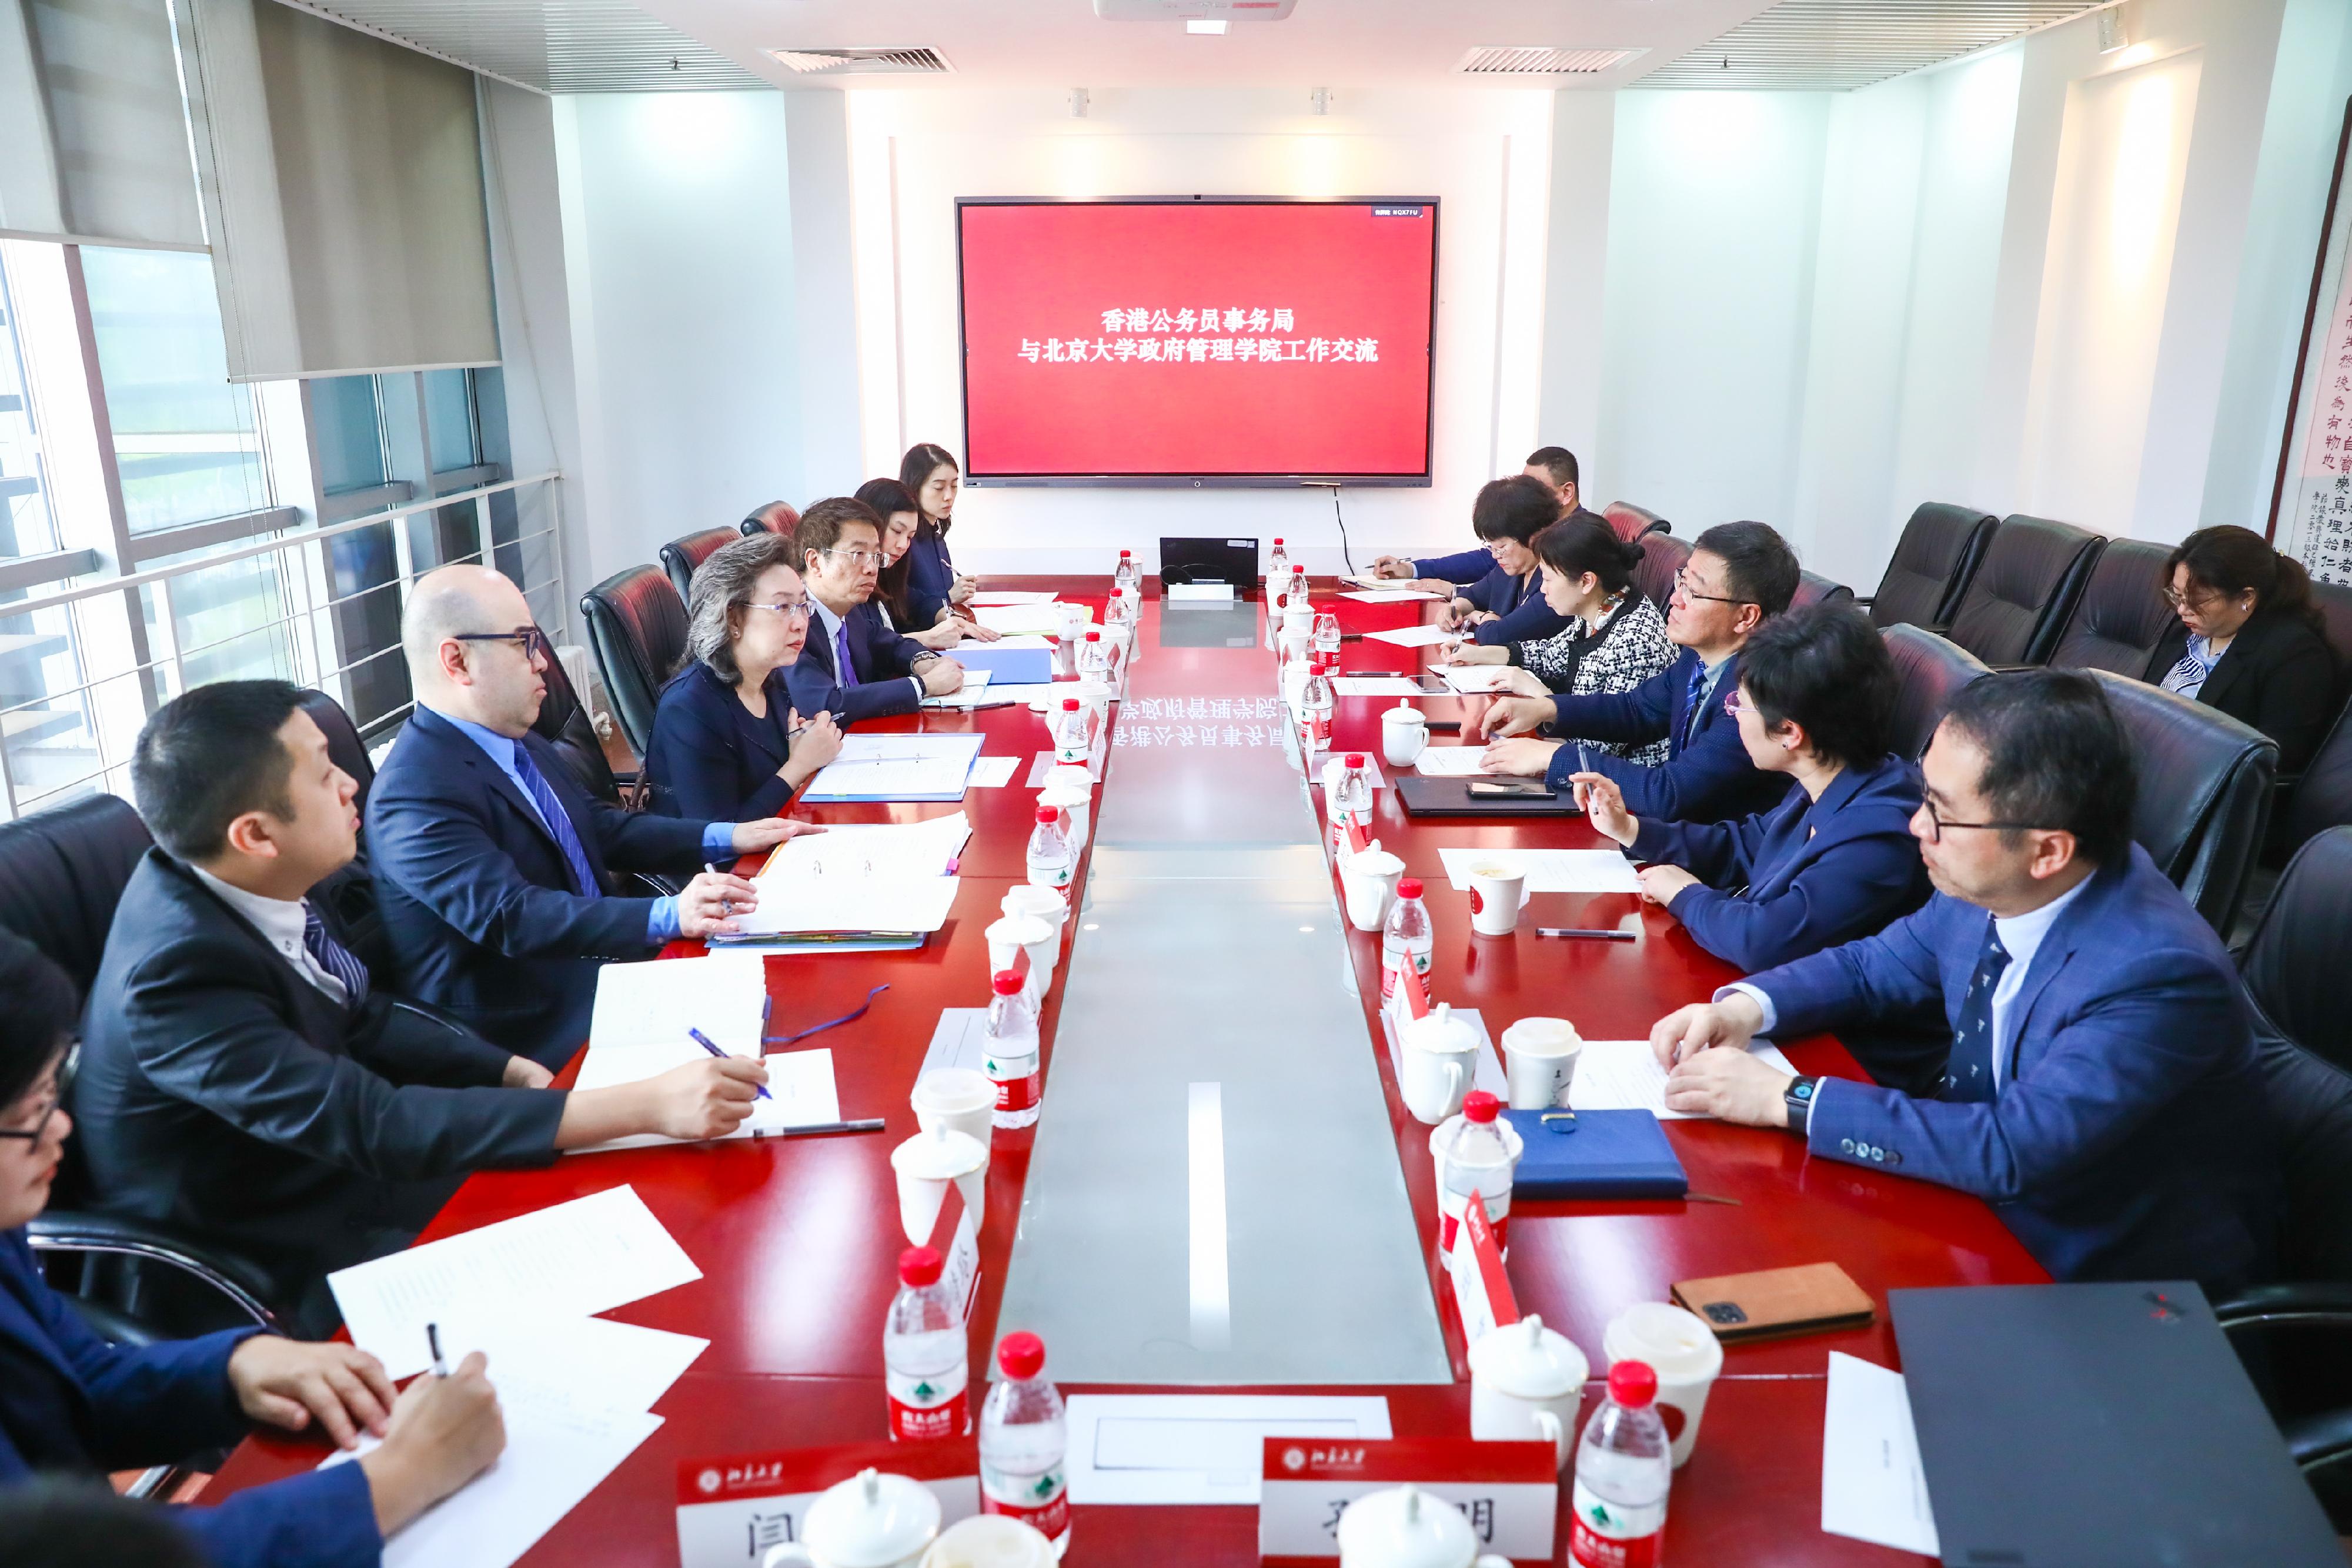 The Secretary for the Civil Service, Mrs Ingrid Yeung, called on Peking University today (April 28) on her last day of her visit to Beijing. Photo shows Mrs Yeung (fourth left) and the Permanent Secretary for the Civil Service, Mr Clement Leung (fifth left), having a working seminar with the Dean of the School of Government of Peking University, Professor Yan Jirong (third right).